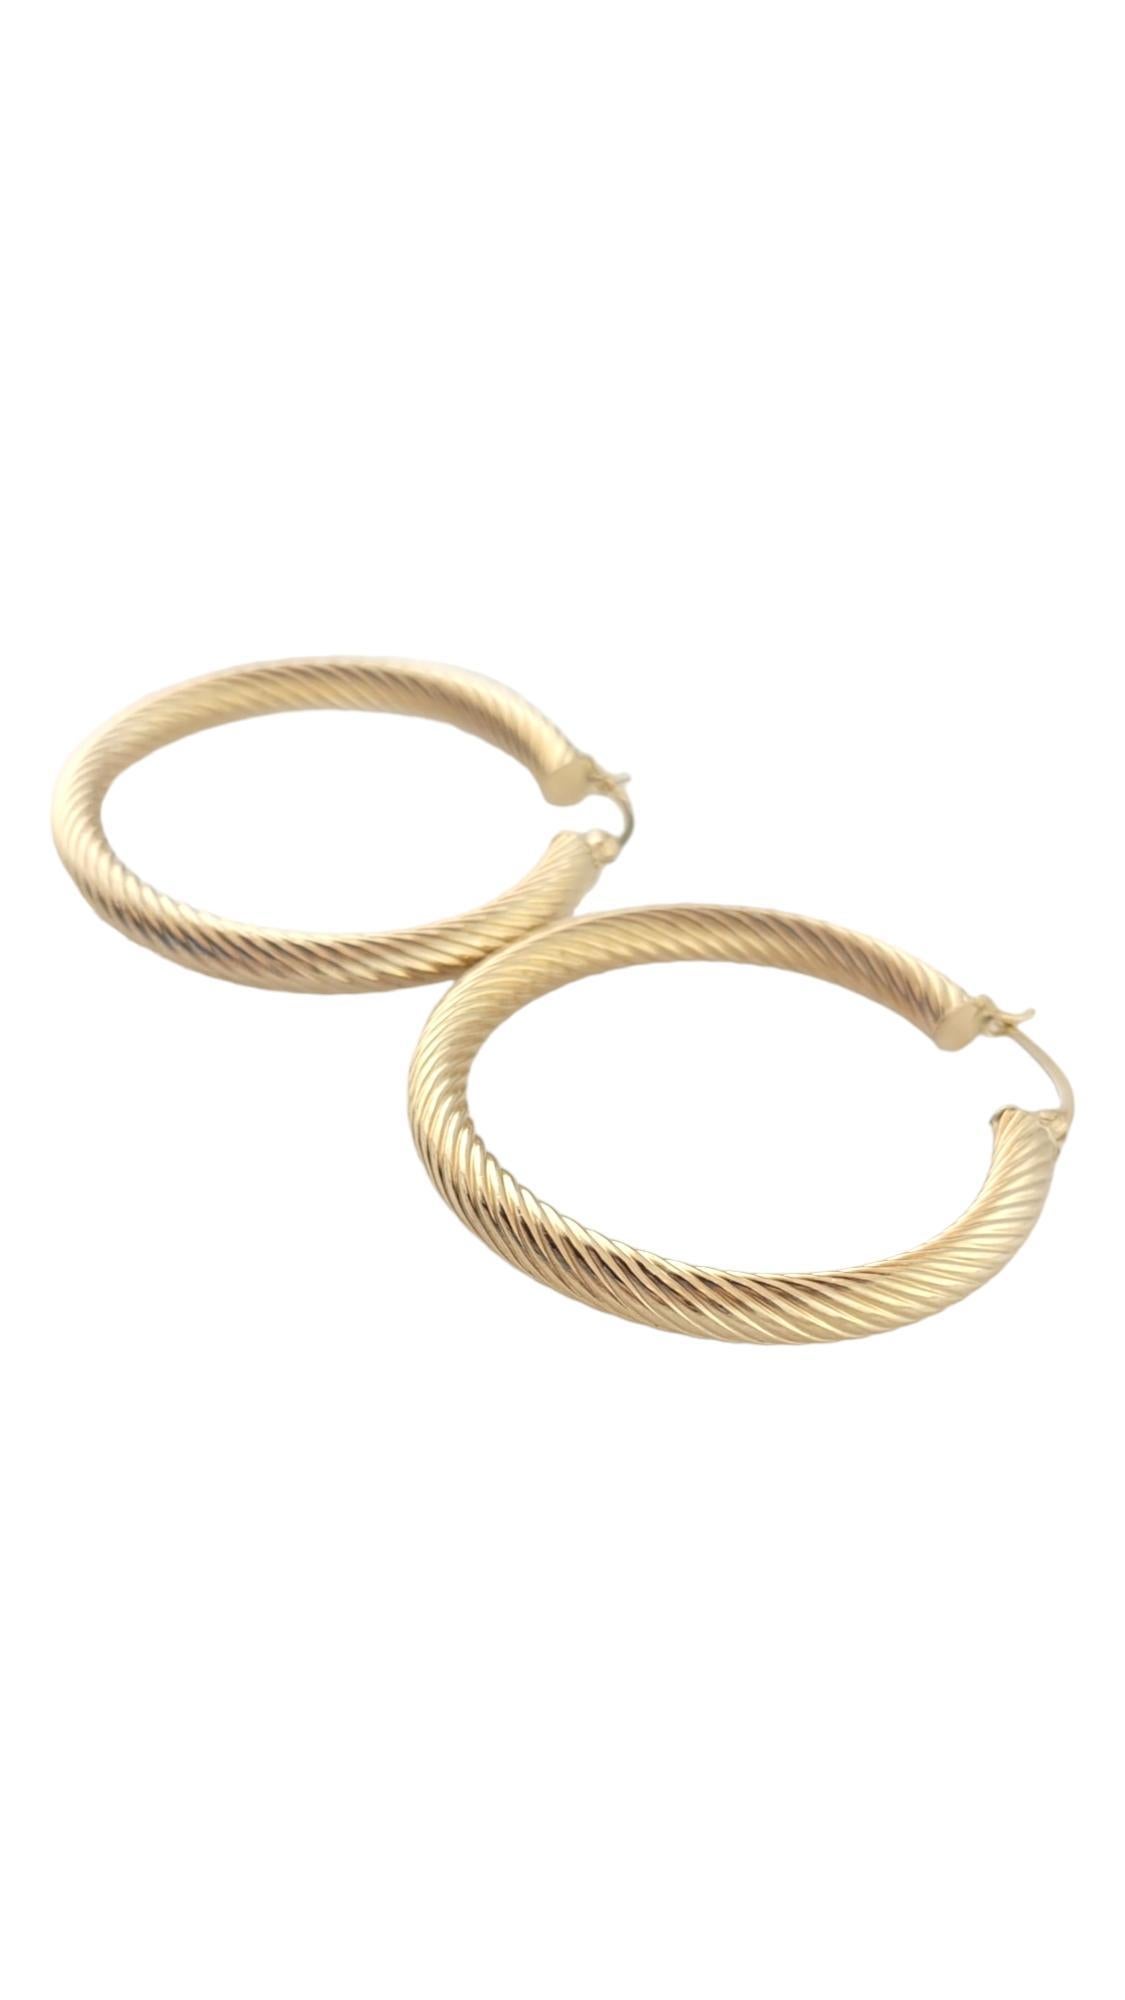 14K Yellow Gold Ribbed Hoop Earrings #16364 In Good Condition For Sale In Washington Depot, CT